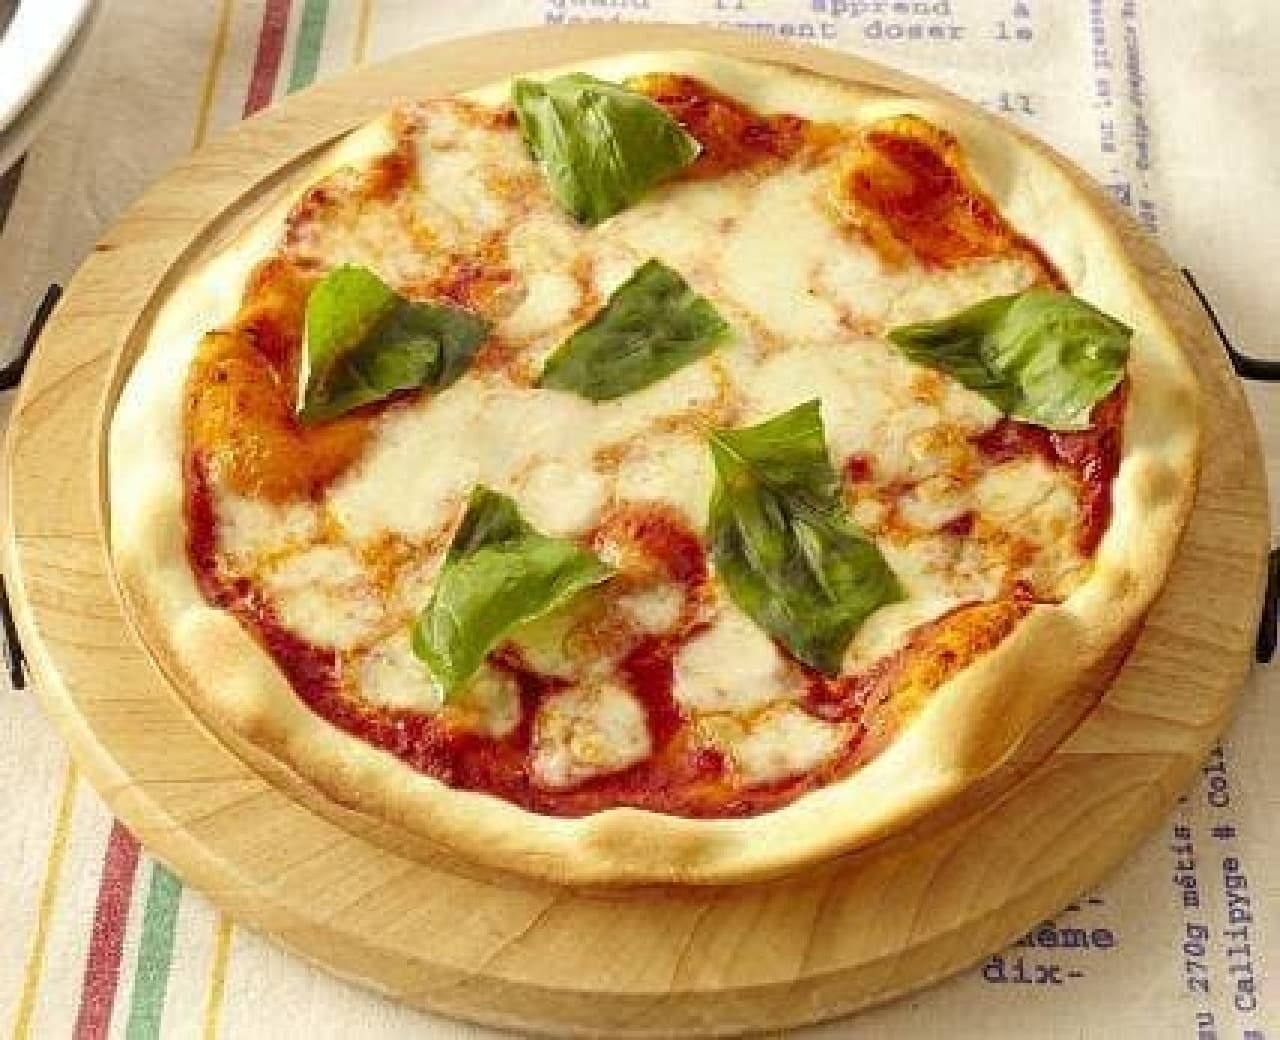 Crispy pizza is baked in less than 4 minutes!